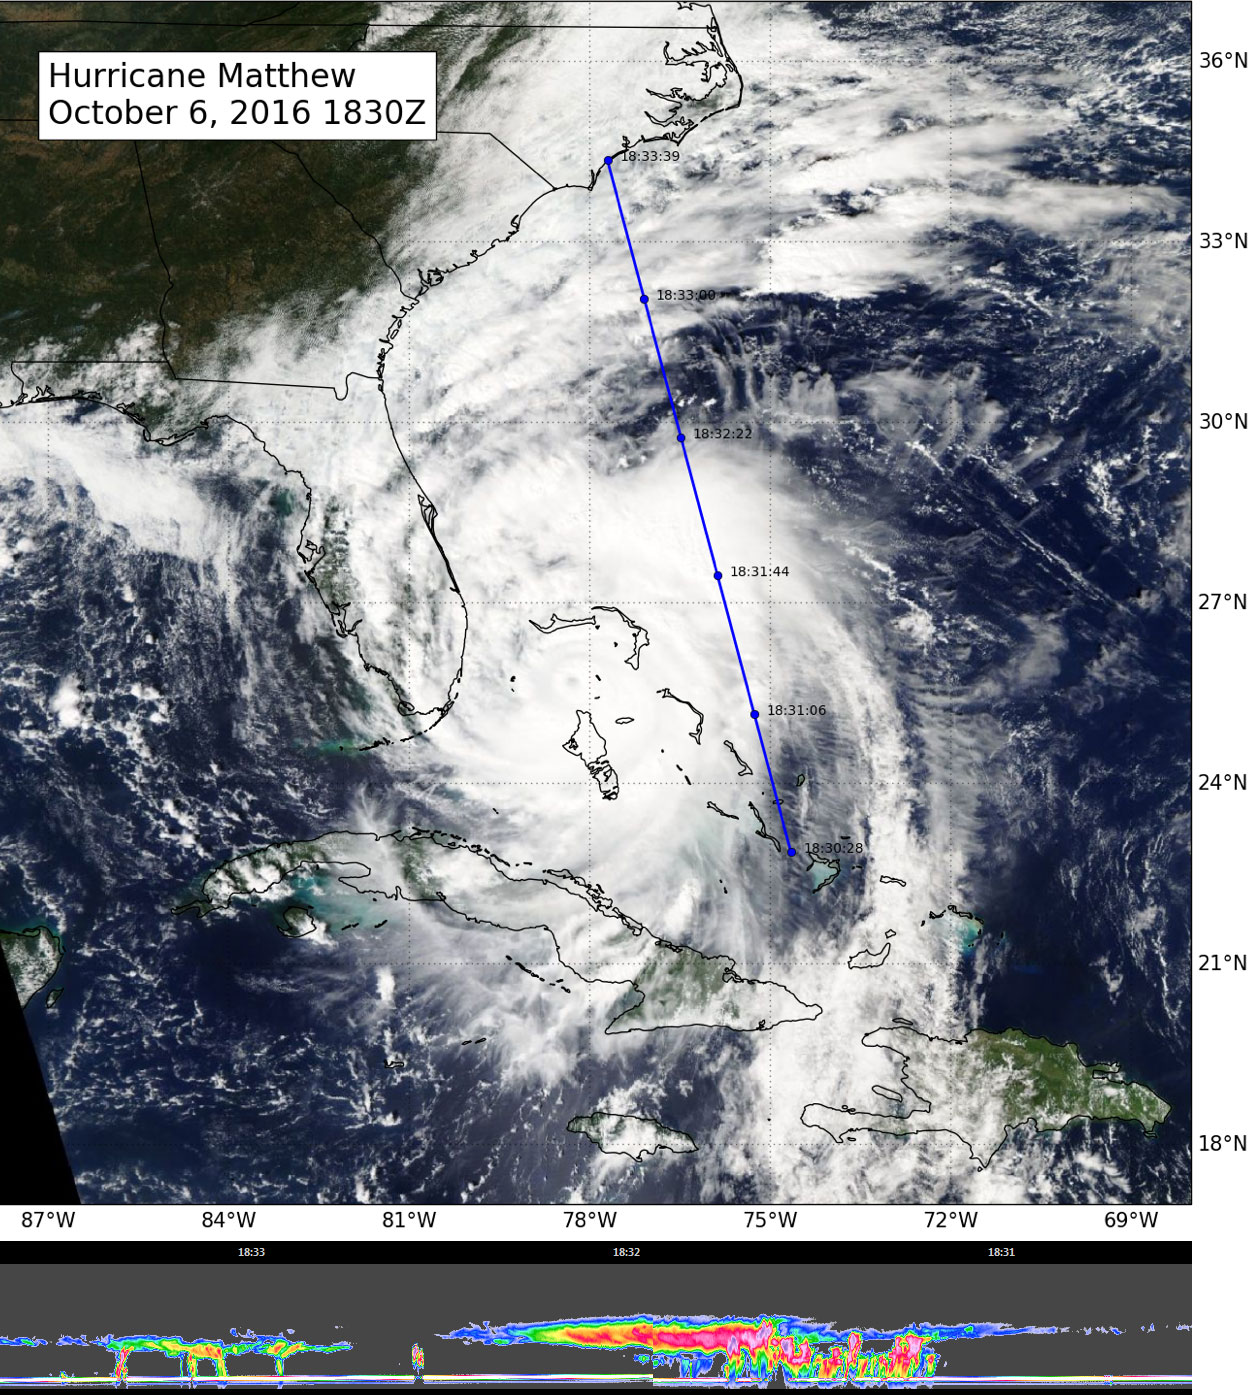 Cloudsat image of Hurricane Matthew, a mass of white clouds over the Caribbean Sea and Florida.